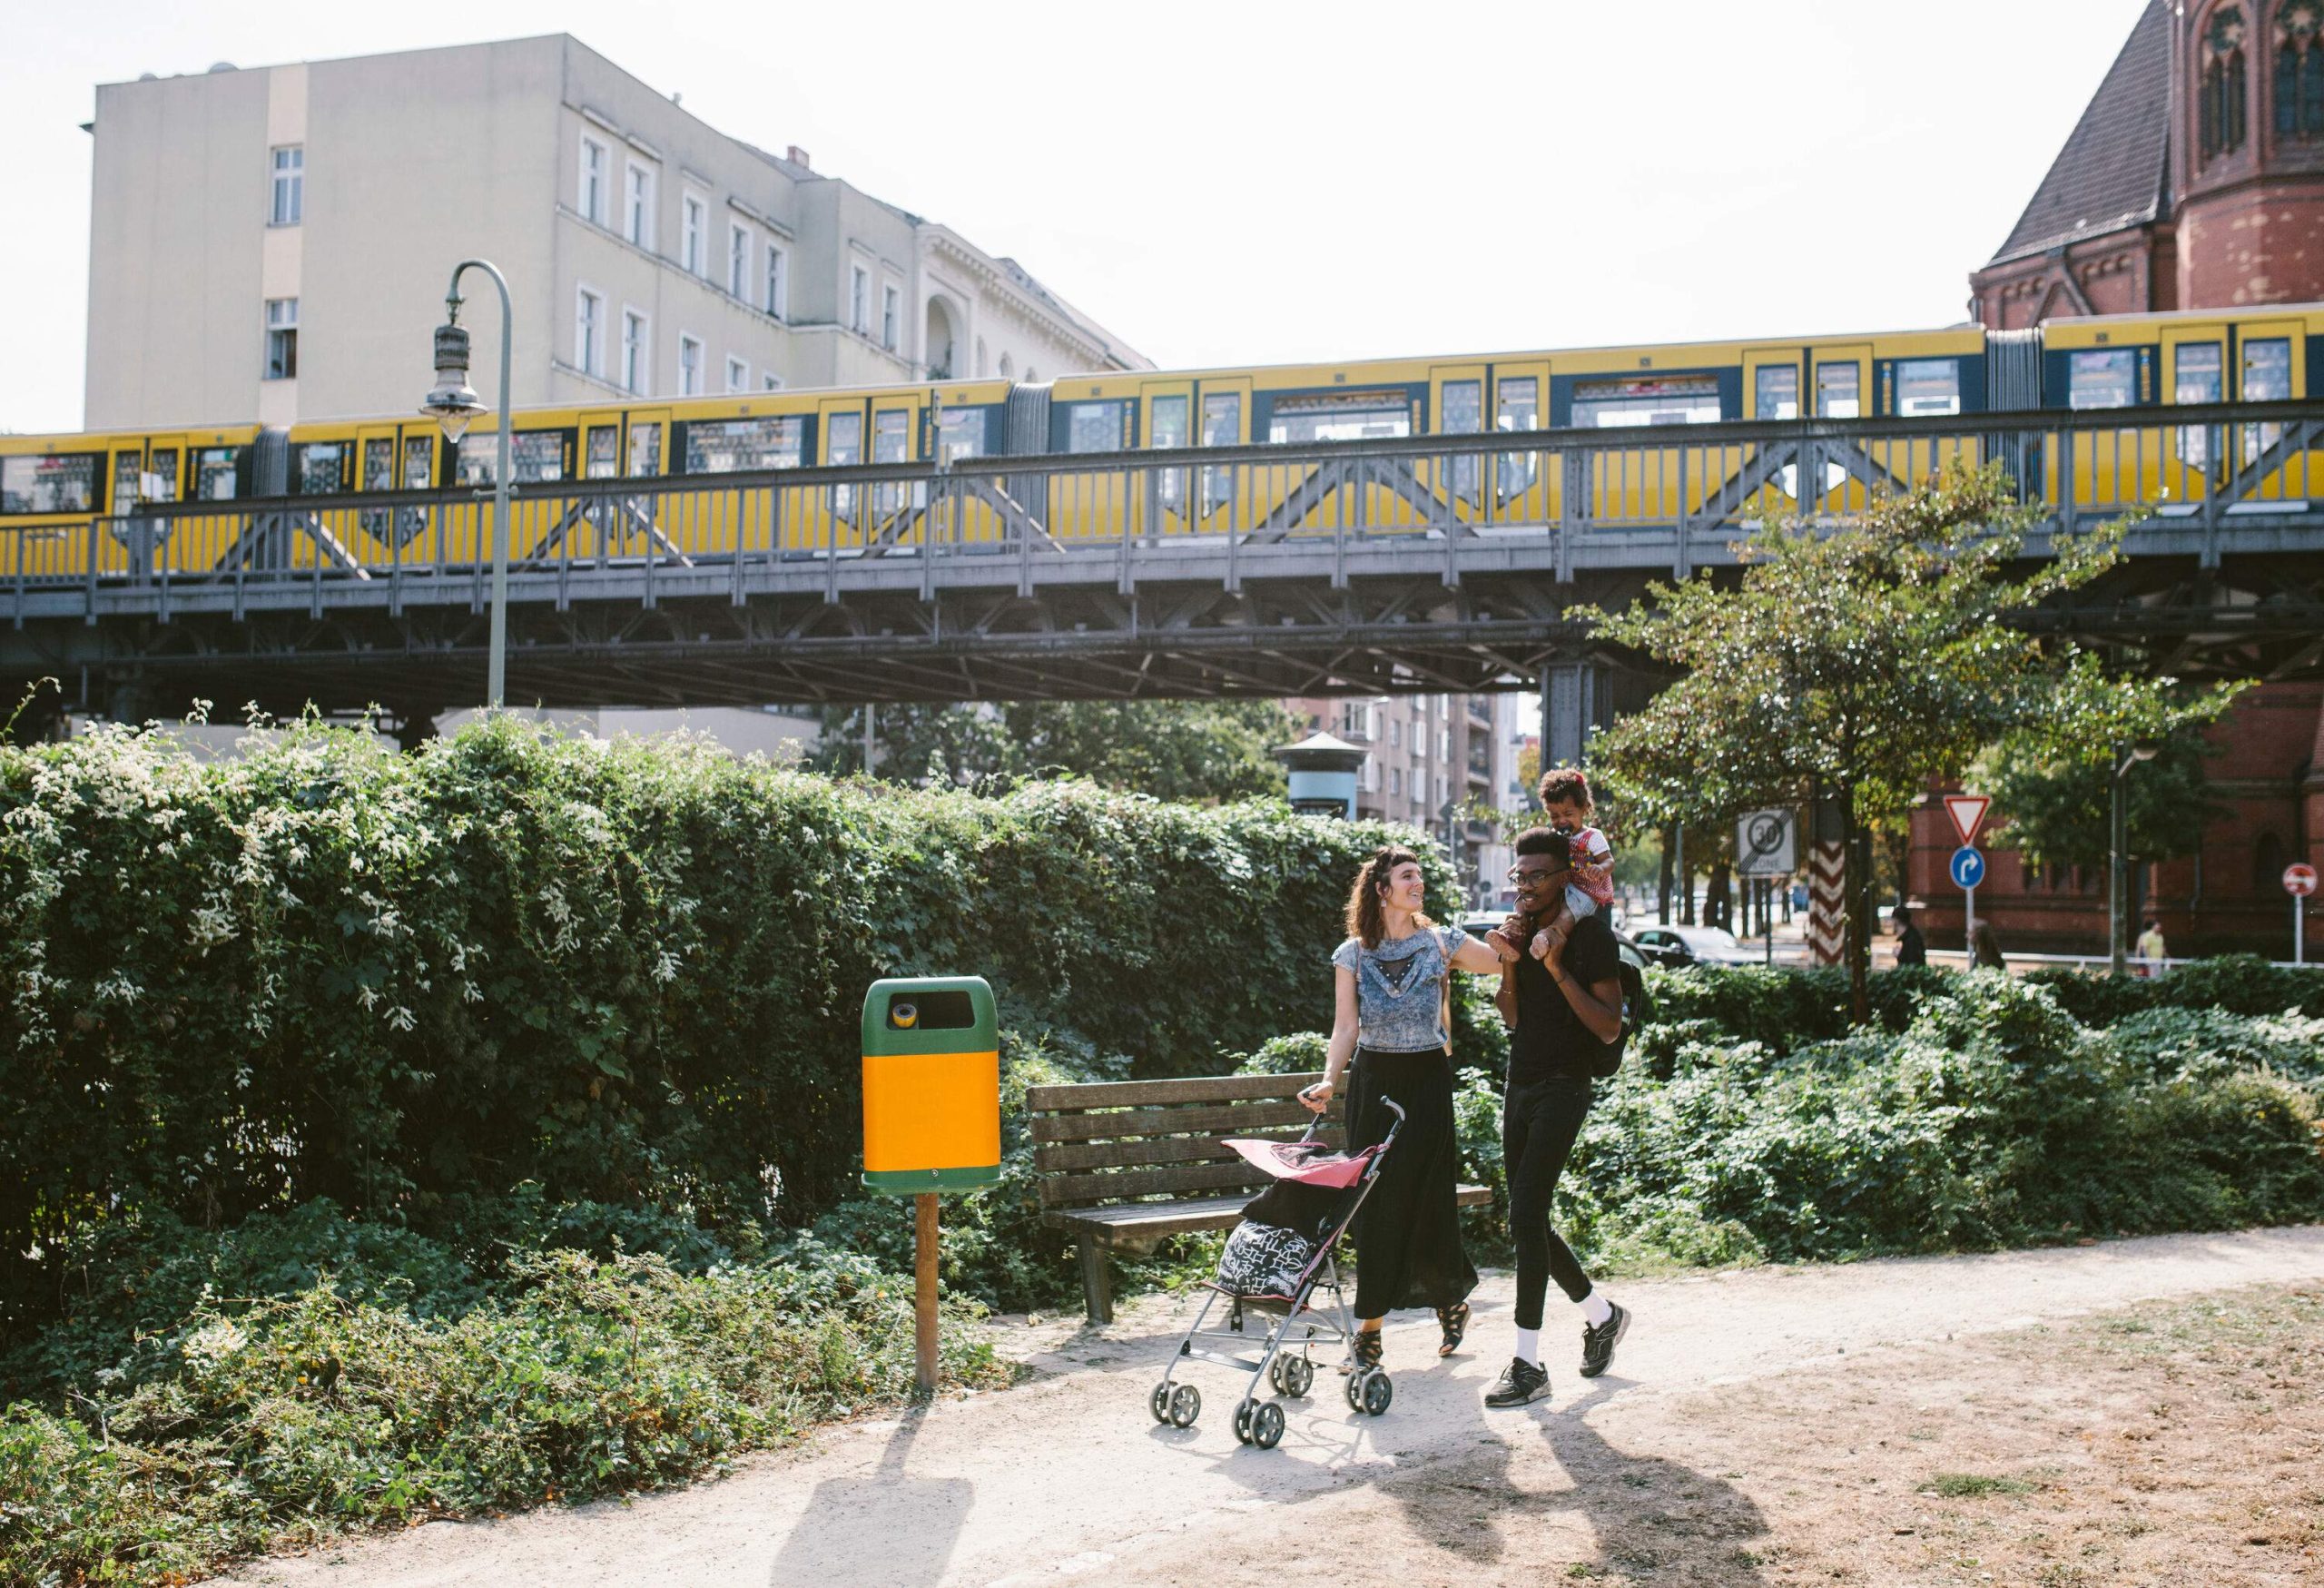 A father carries his toddler on his shoulder alongside her wife, walking on an unpaved pathway with a yellow train travelling above them in the background.